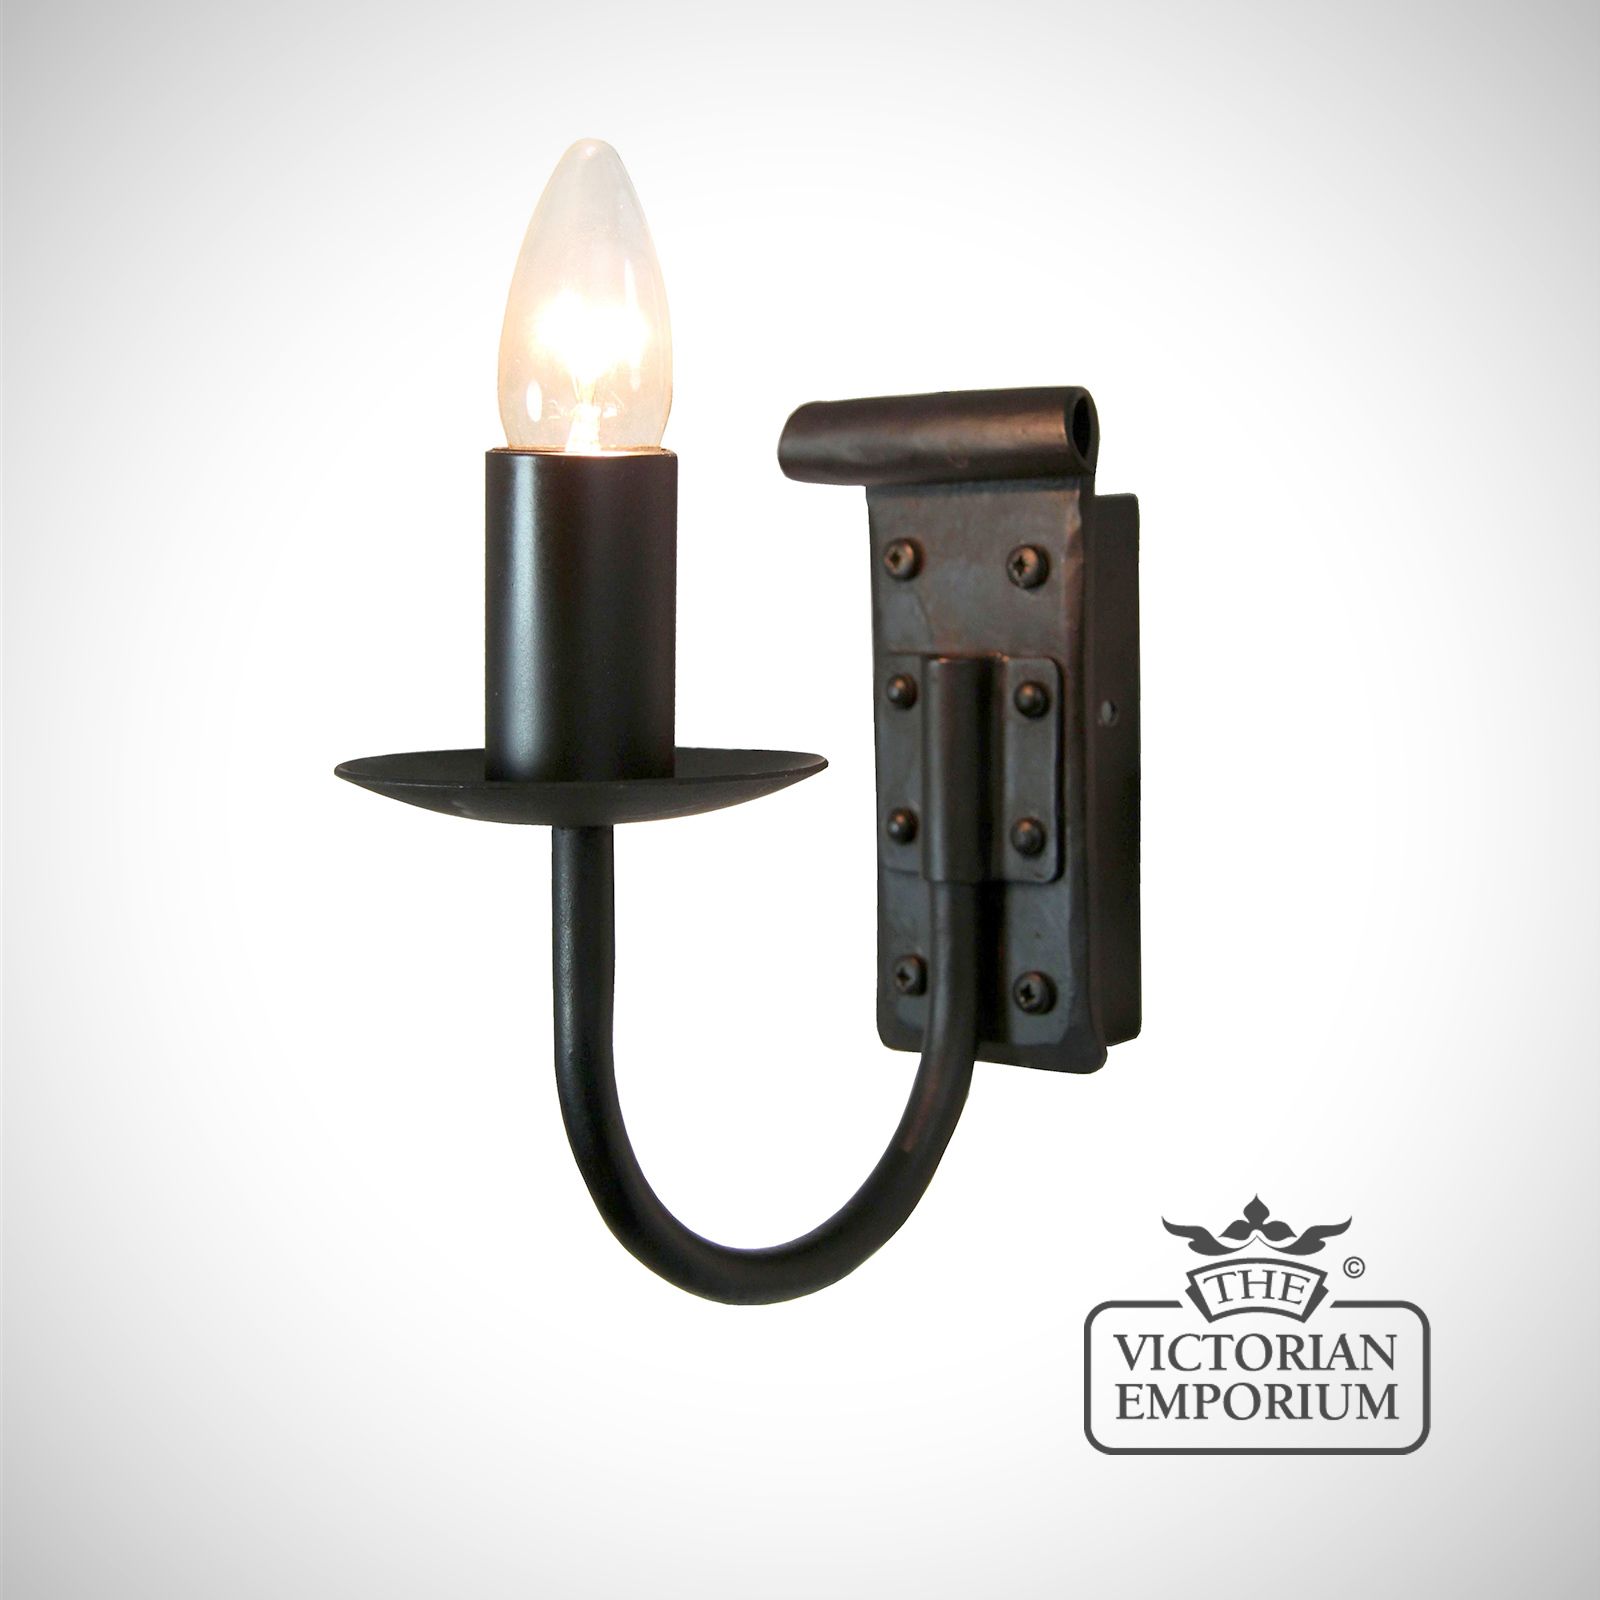 Chaucer single wall sconce